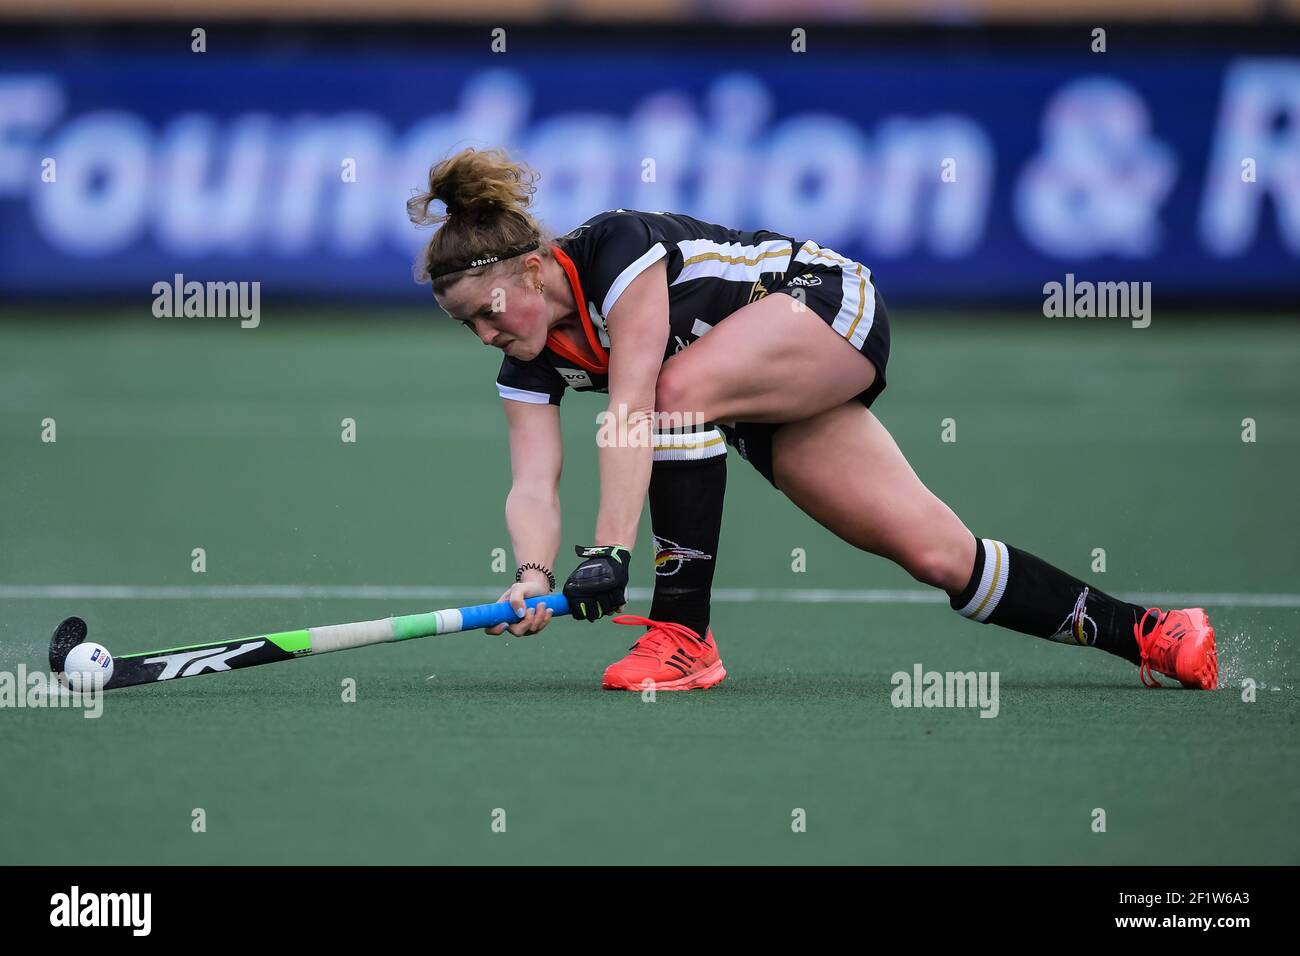 AMSTELVEEN, NETHERLANDS - MARCH 6: Maike Schaunig of Germany during the FIH Pro League match between Netherlands Women and Germany Women at Wagener St Stock Photo